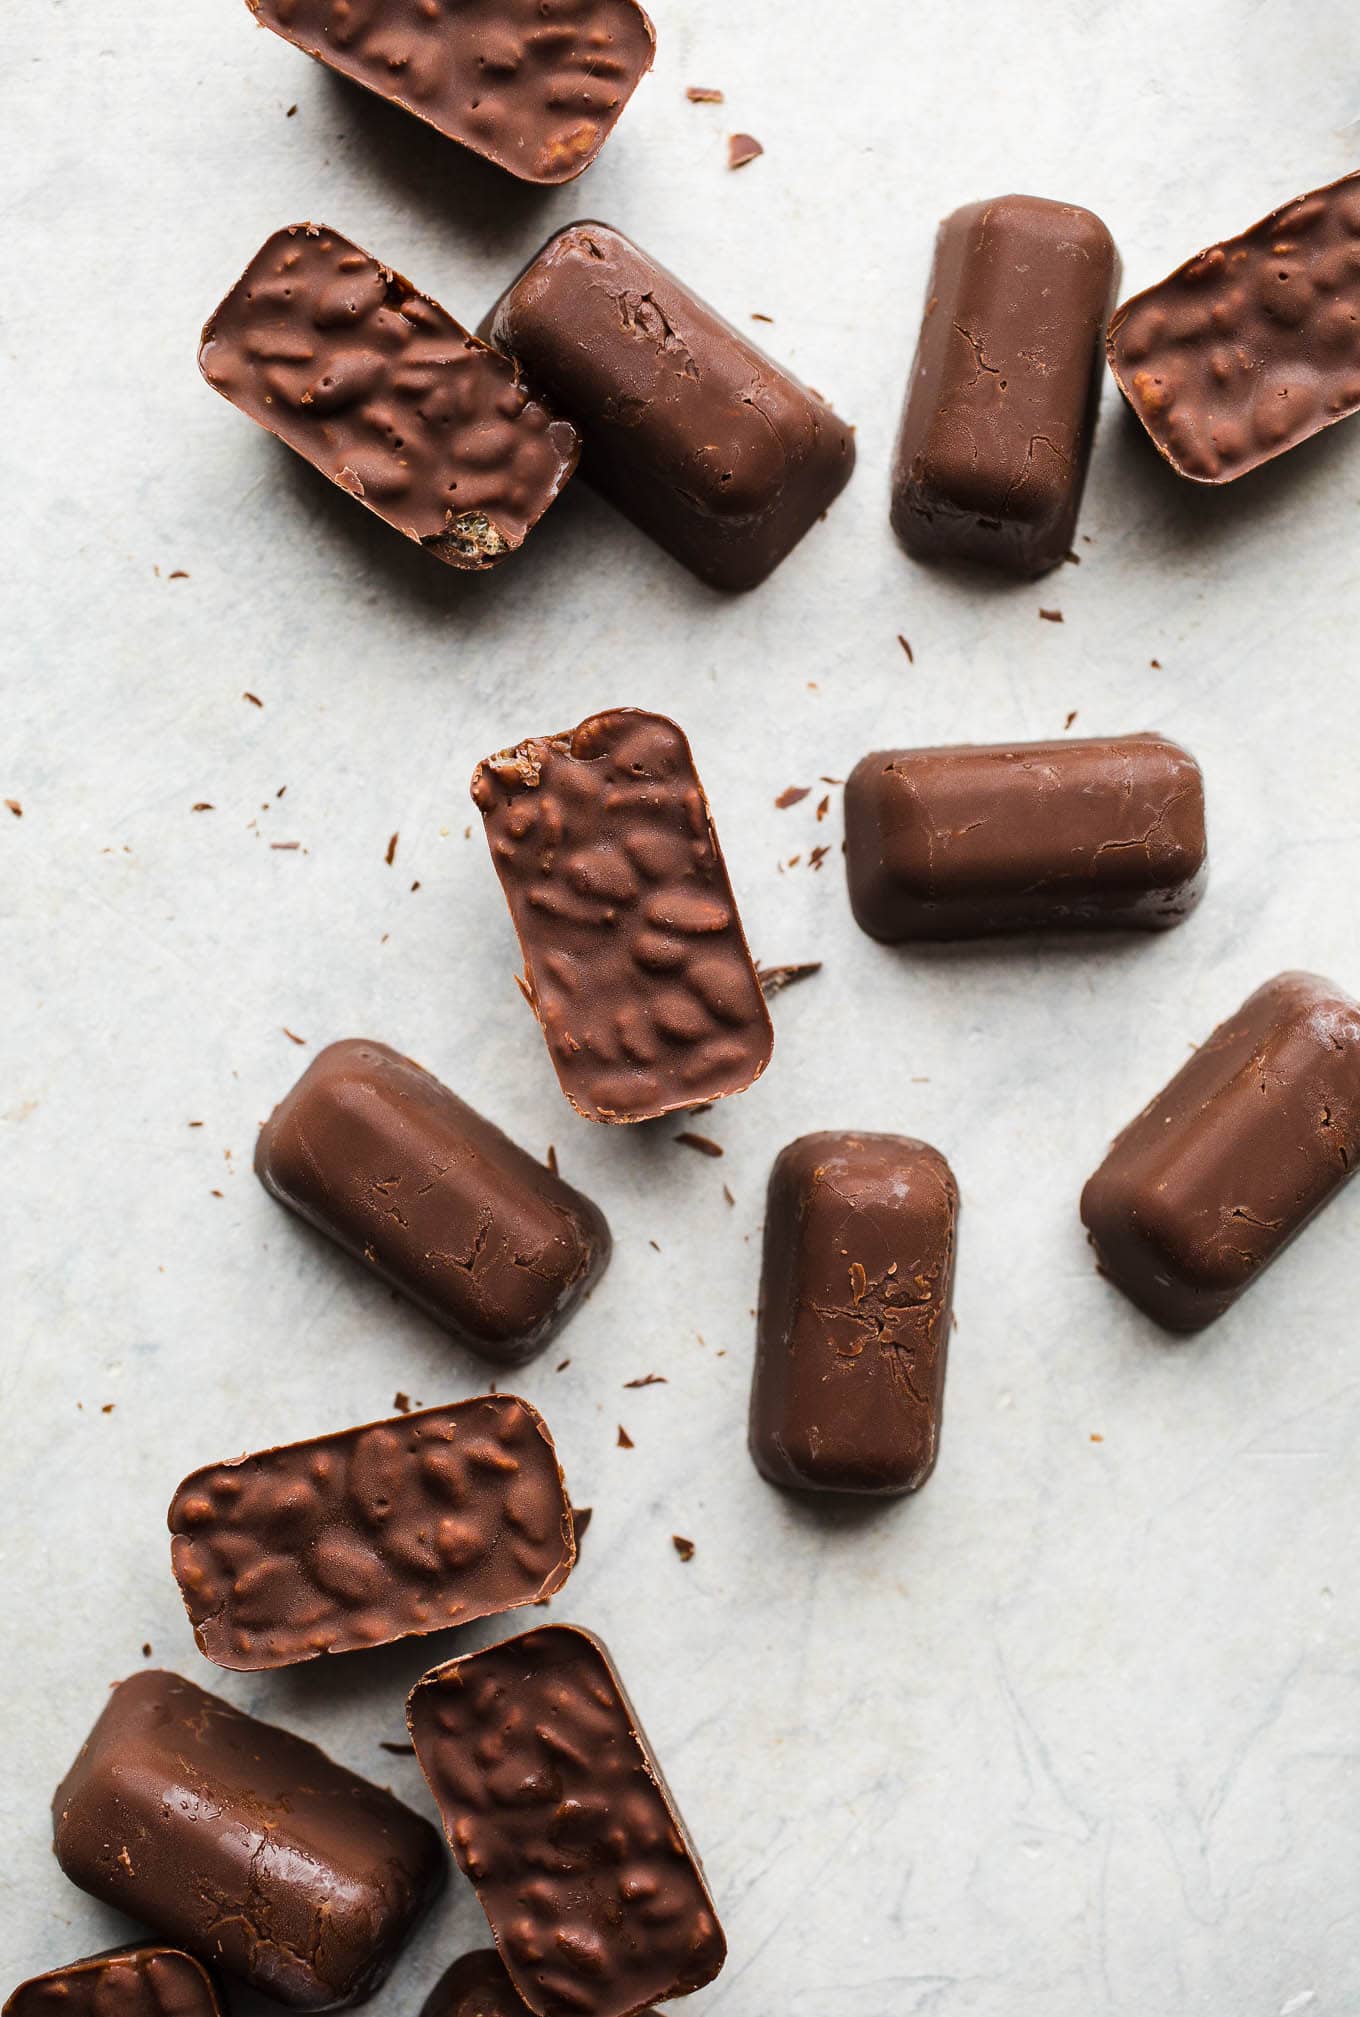 Homemade Mini Crunch Bars made with dairy-free chocolate, gluten-free rice cereal, and coconut oil. Use a standard ice cube tray to make these individual serving chocolate crunch treats!